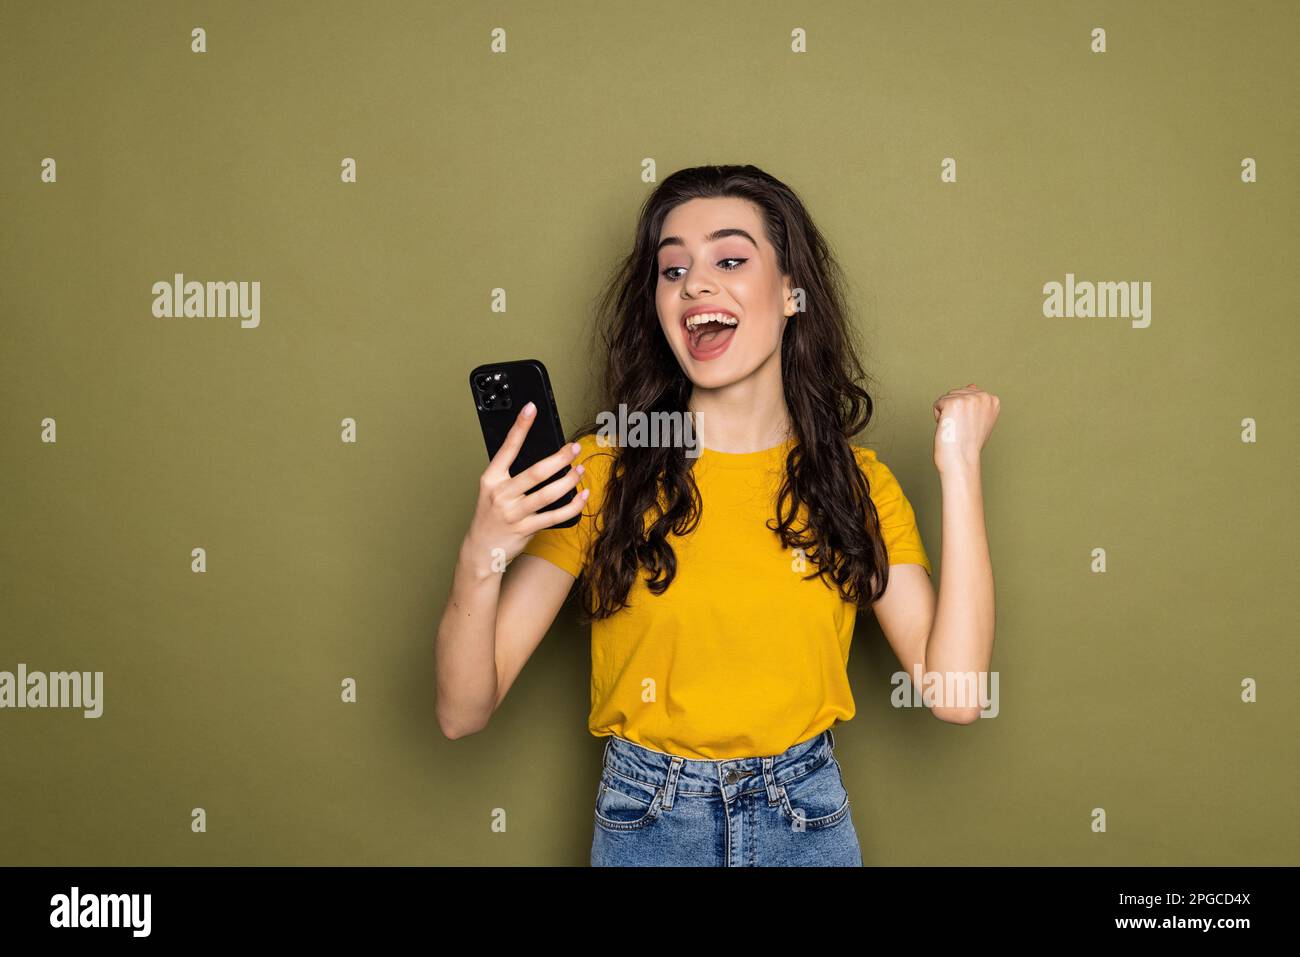 Frustrated shocked woman with long hair with smartphone in hands on khaki background looking at camera. Bad news, negative human emotions concept. Stock Photo